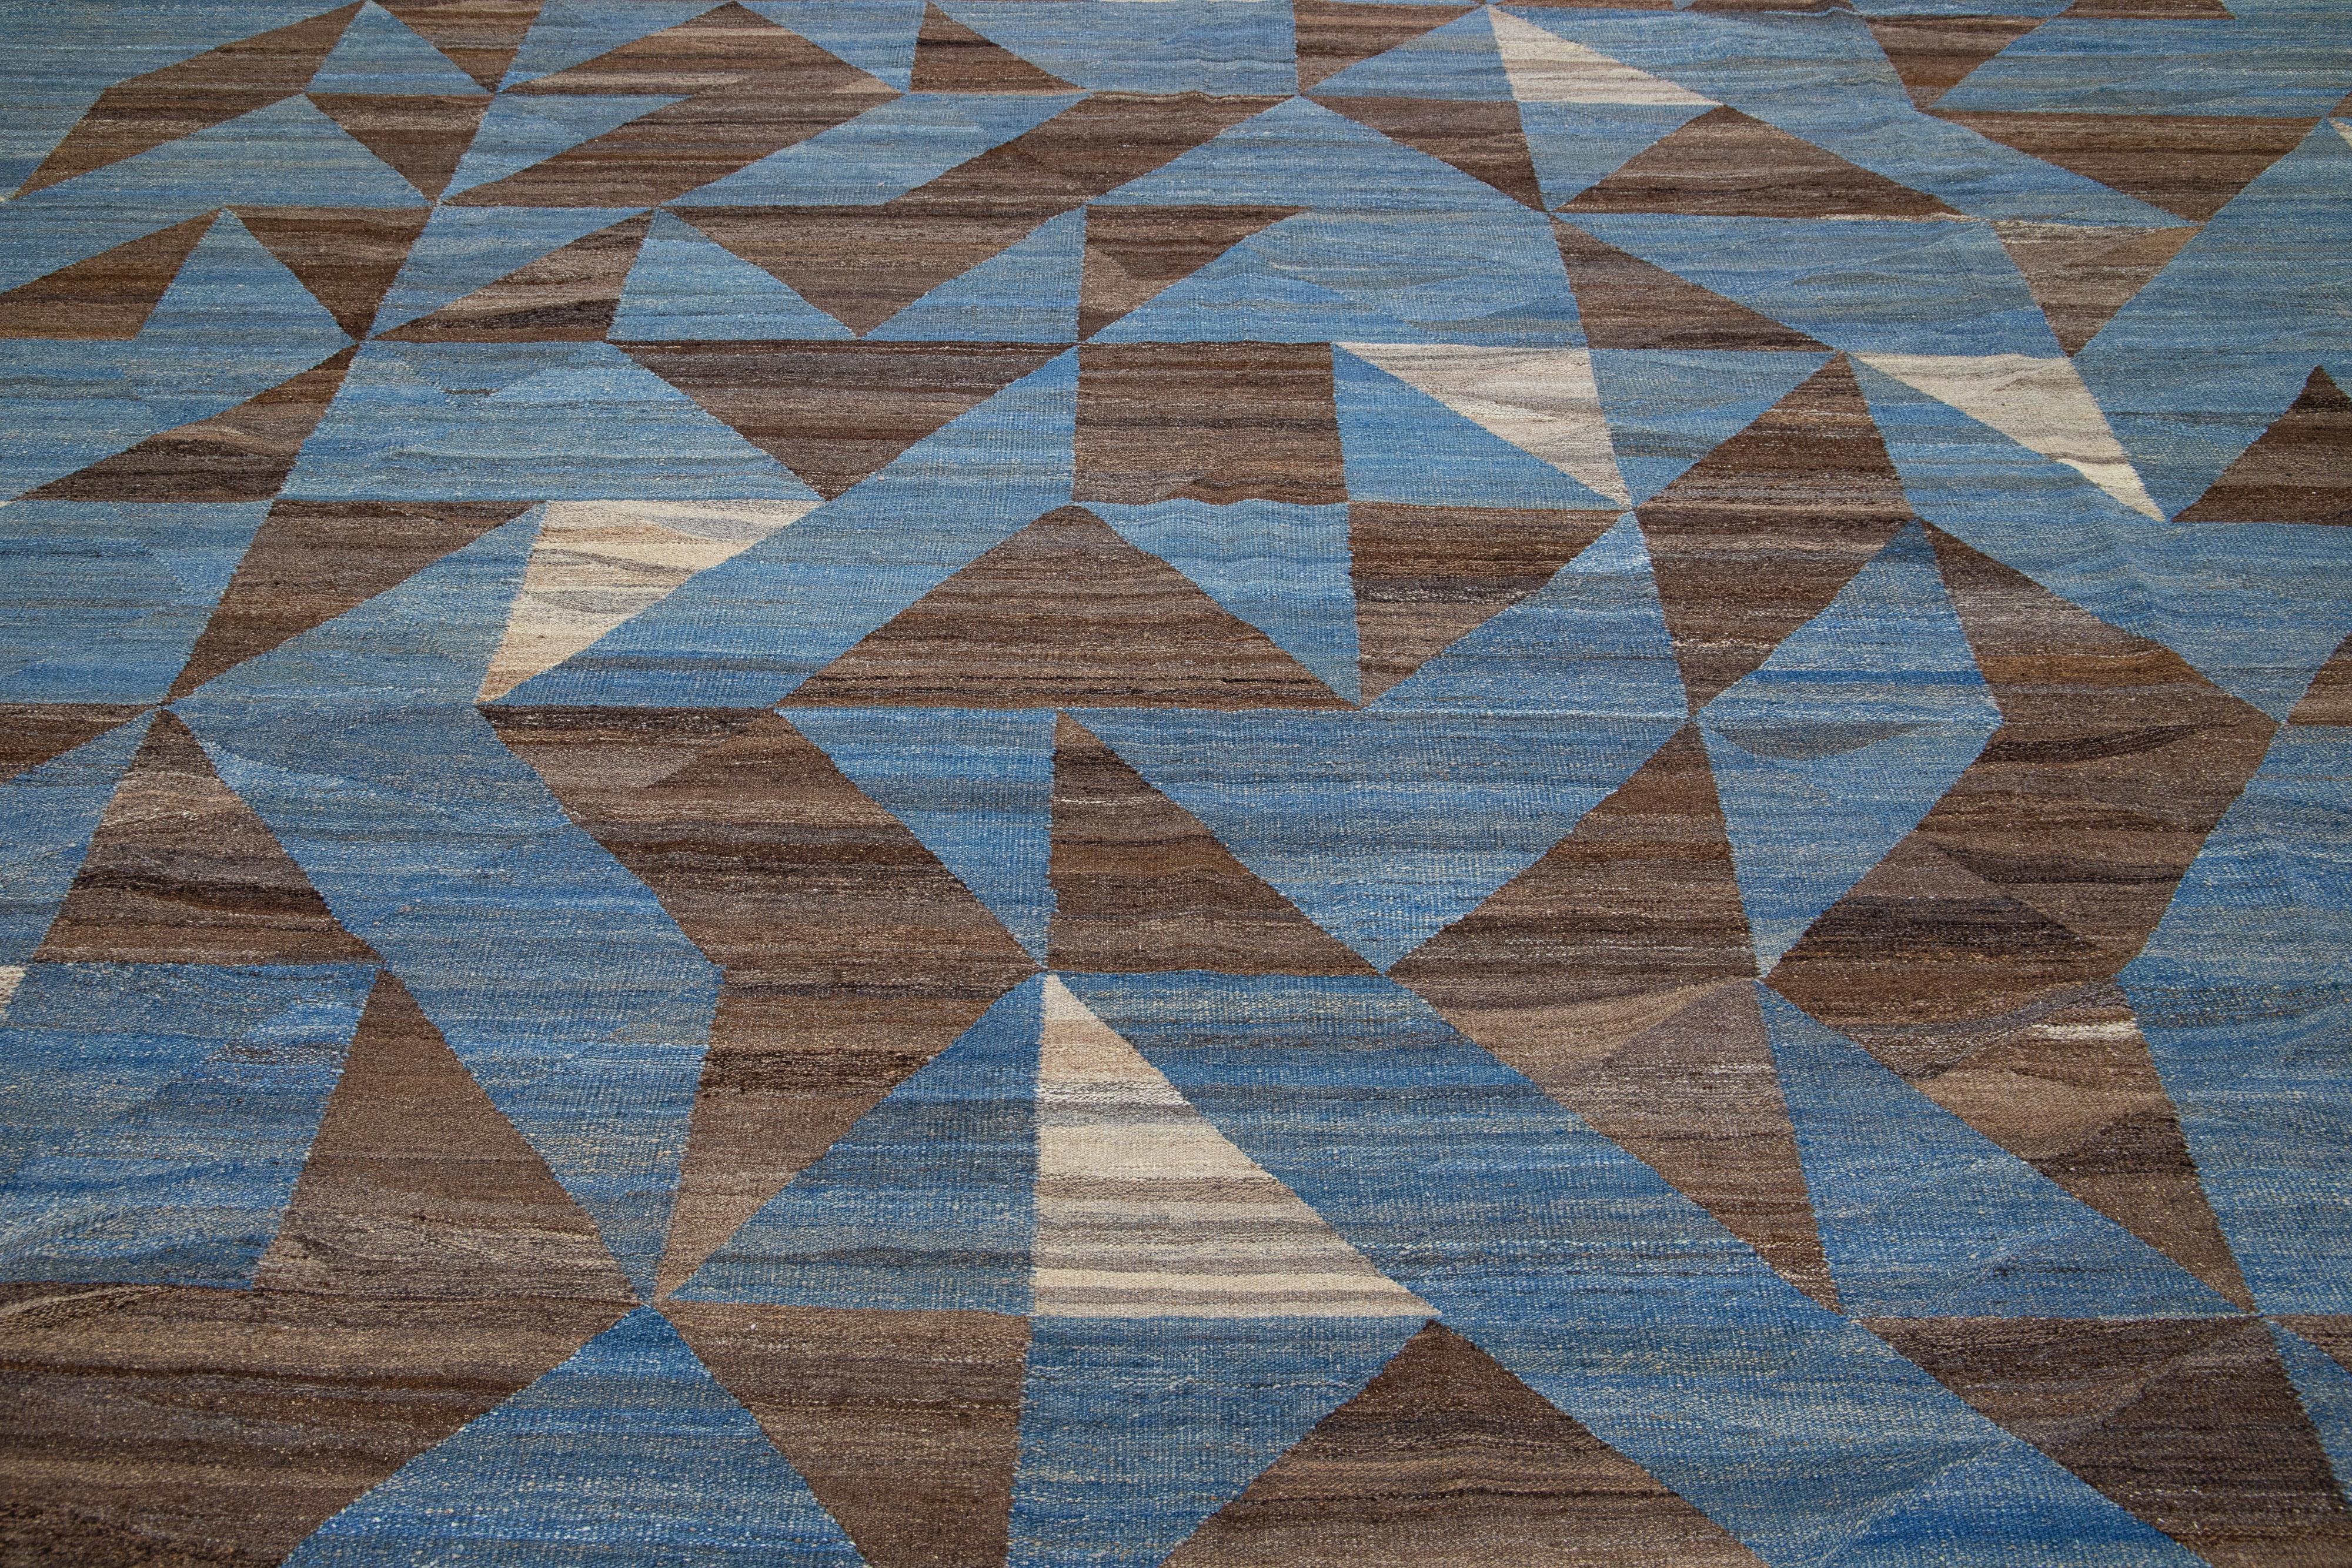 This Deco flatweave wool rug exhibits a captivating blue field with brown and beige accents, creating a contemporary and aesthetically-pleasing abstract design. The natural material of the Deco wool rug is designed for comfort and long-lasting